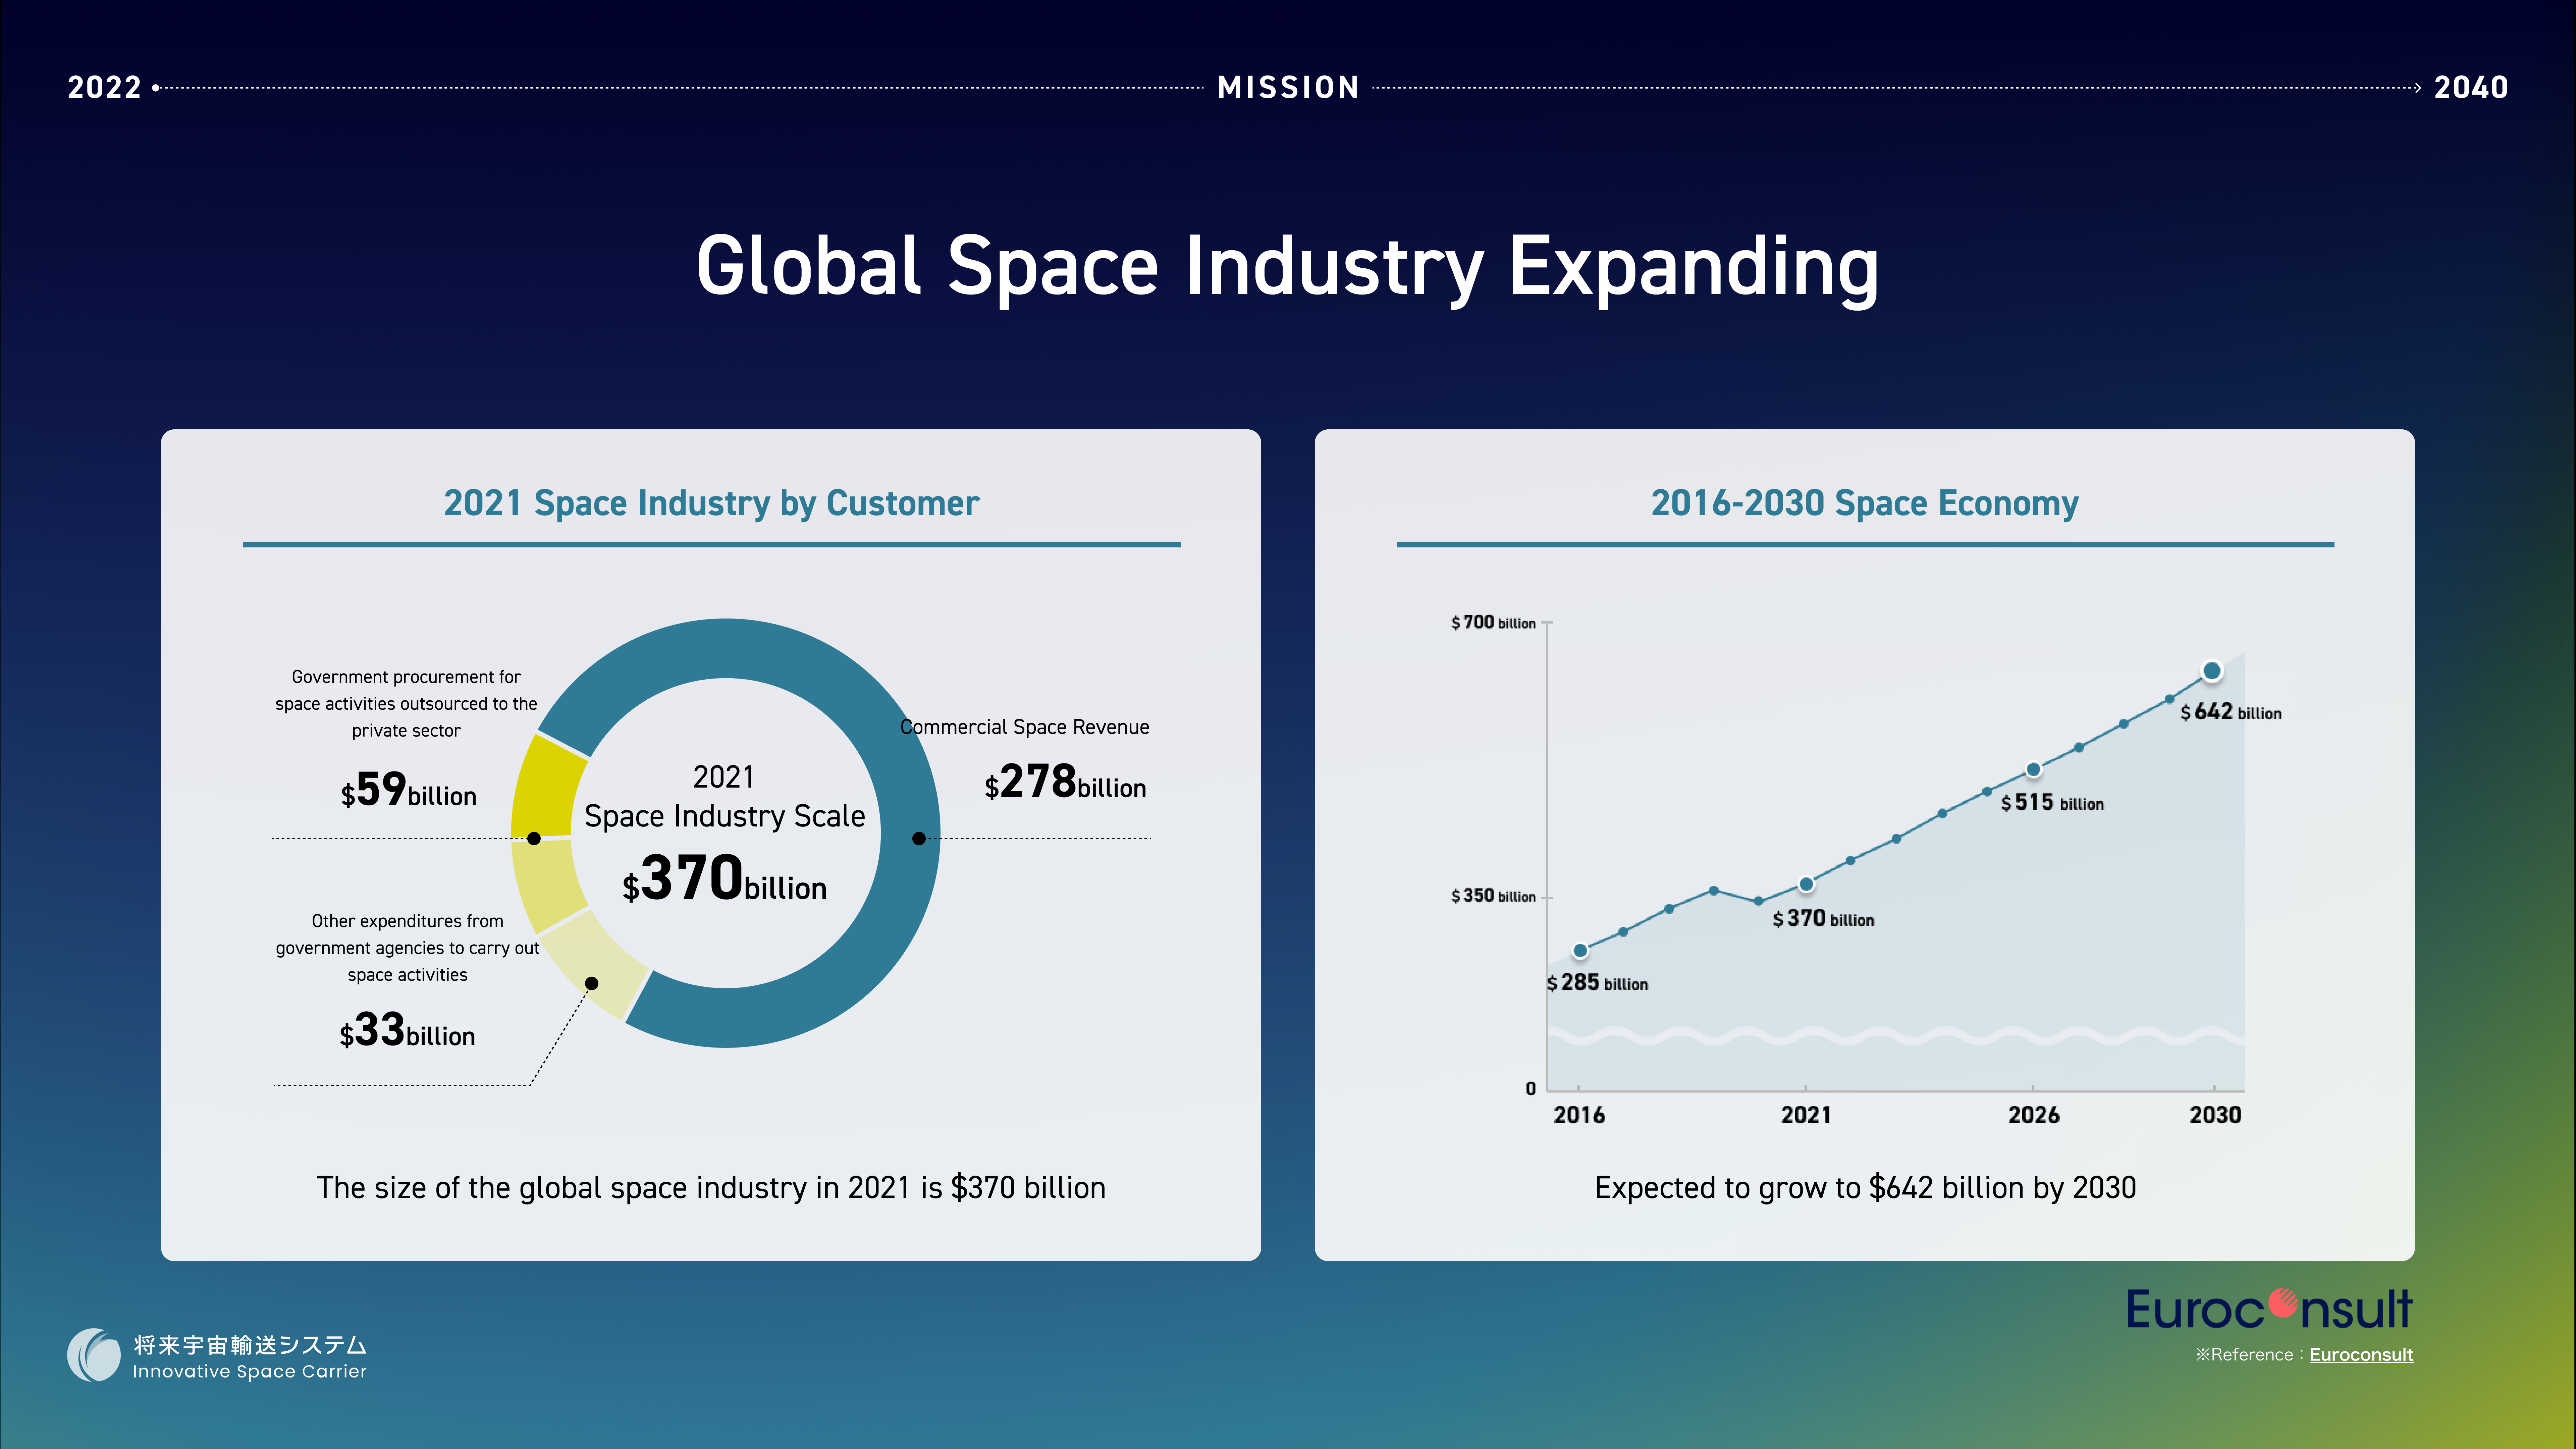 Space Industry Now and in the Future